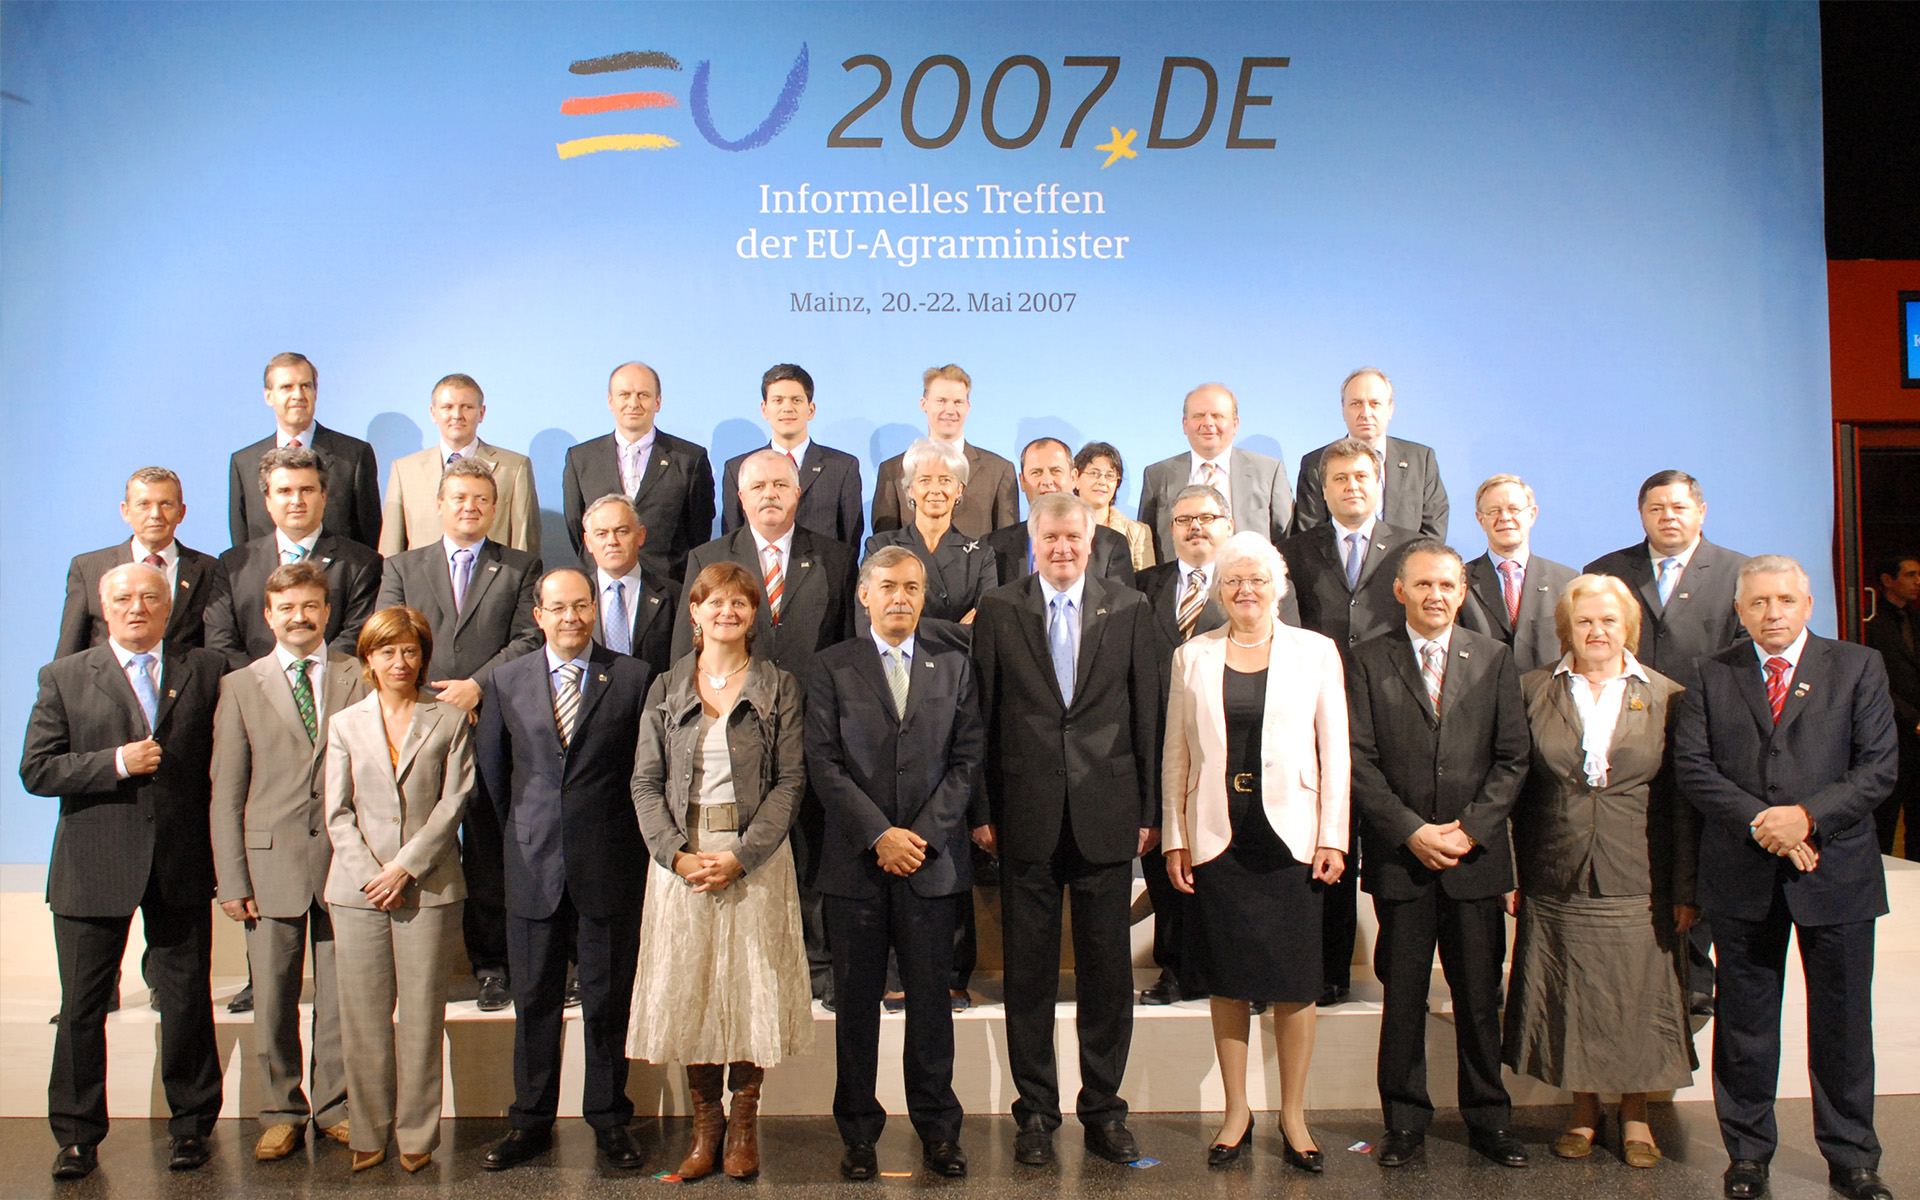 EU 2007 Meeting of EU-Agriculture Ministers in Mainz 04